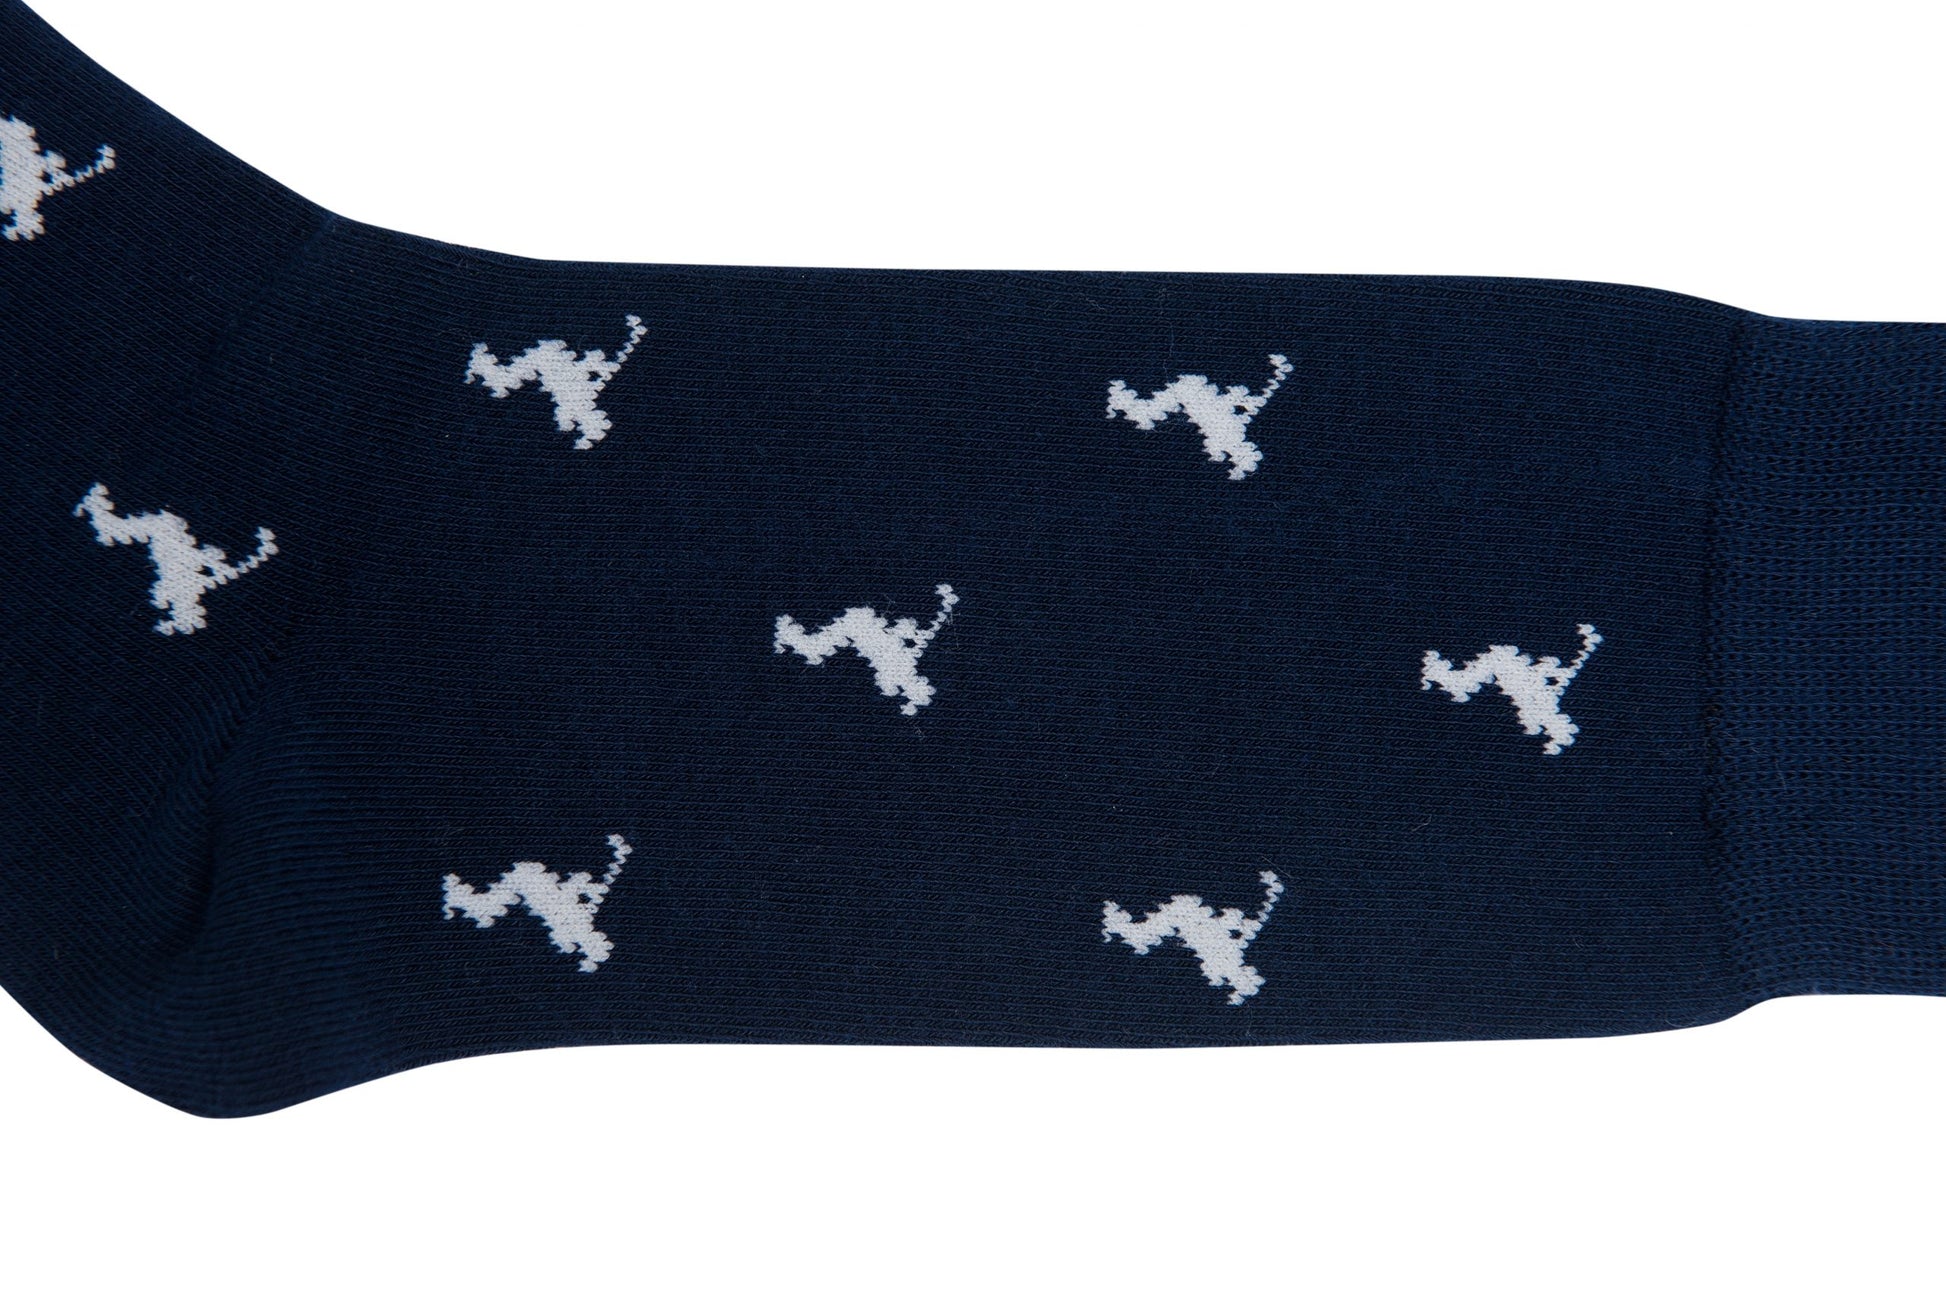 A pair of Golf Swing Socks with white horses.